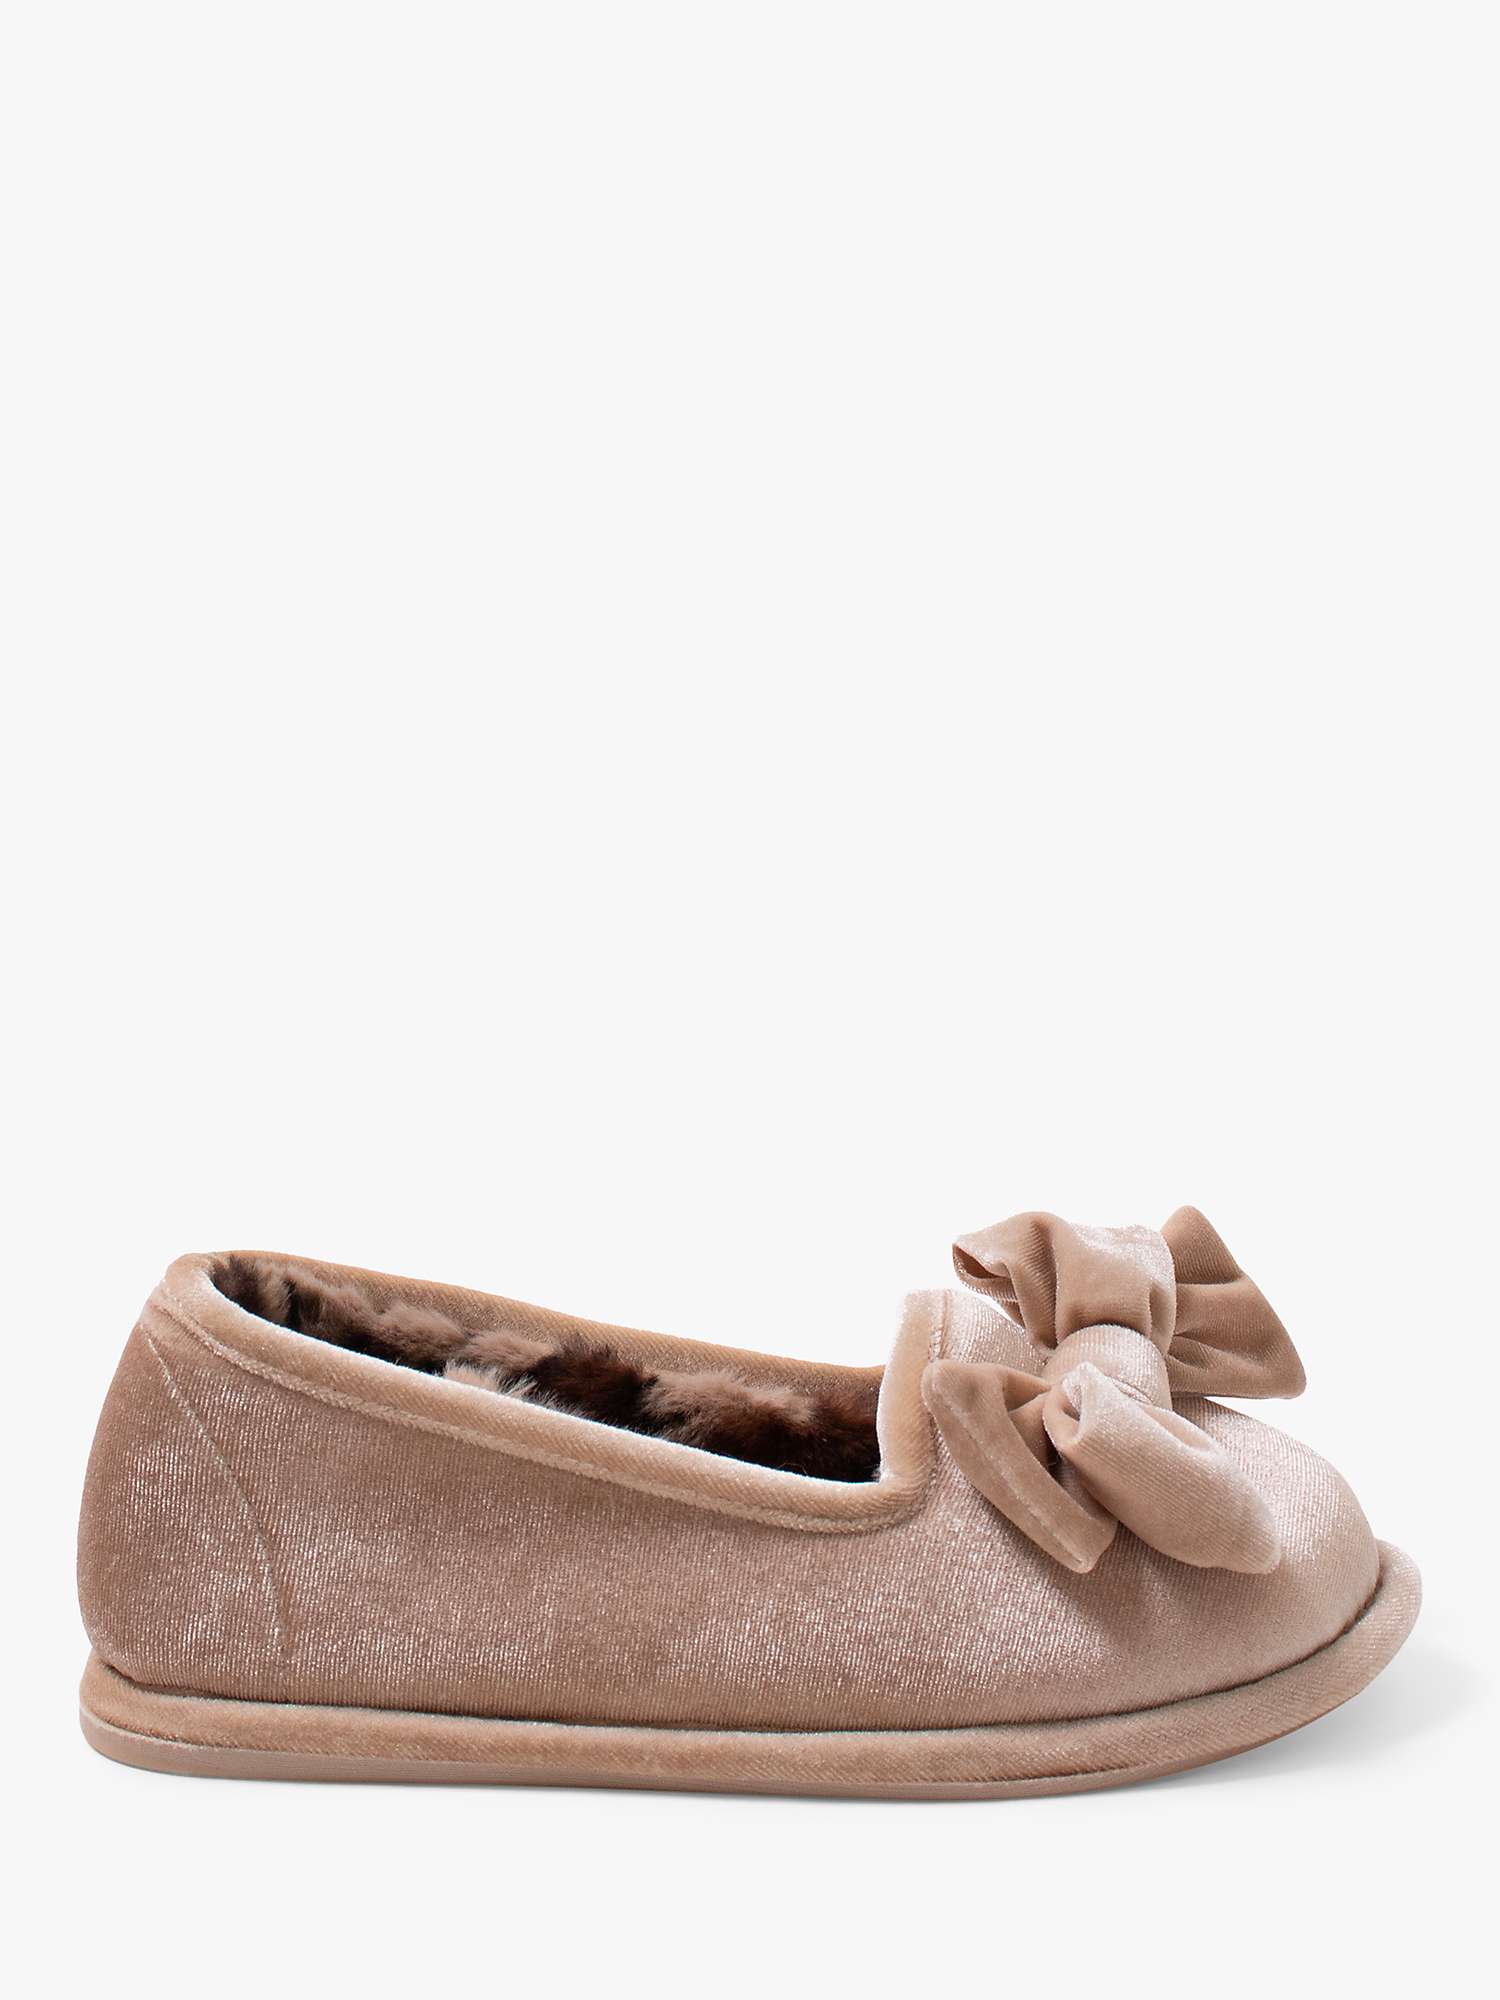 Buy Pretty You London Alissia Bow Slippers Online at johnlewis.com